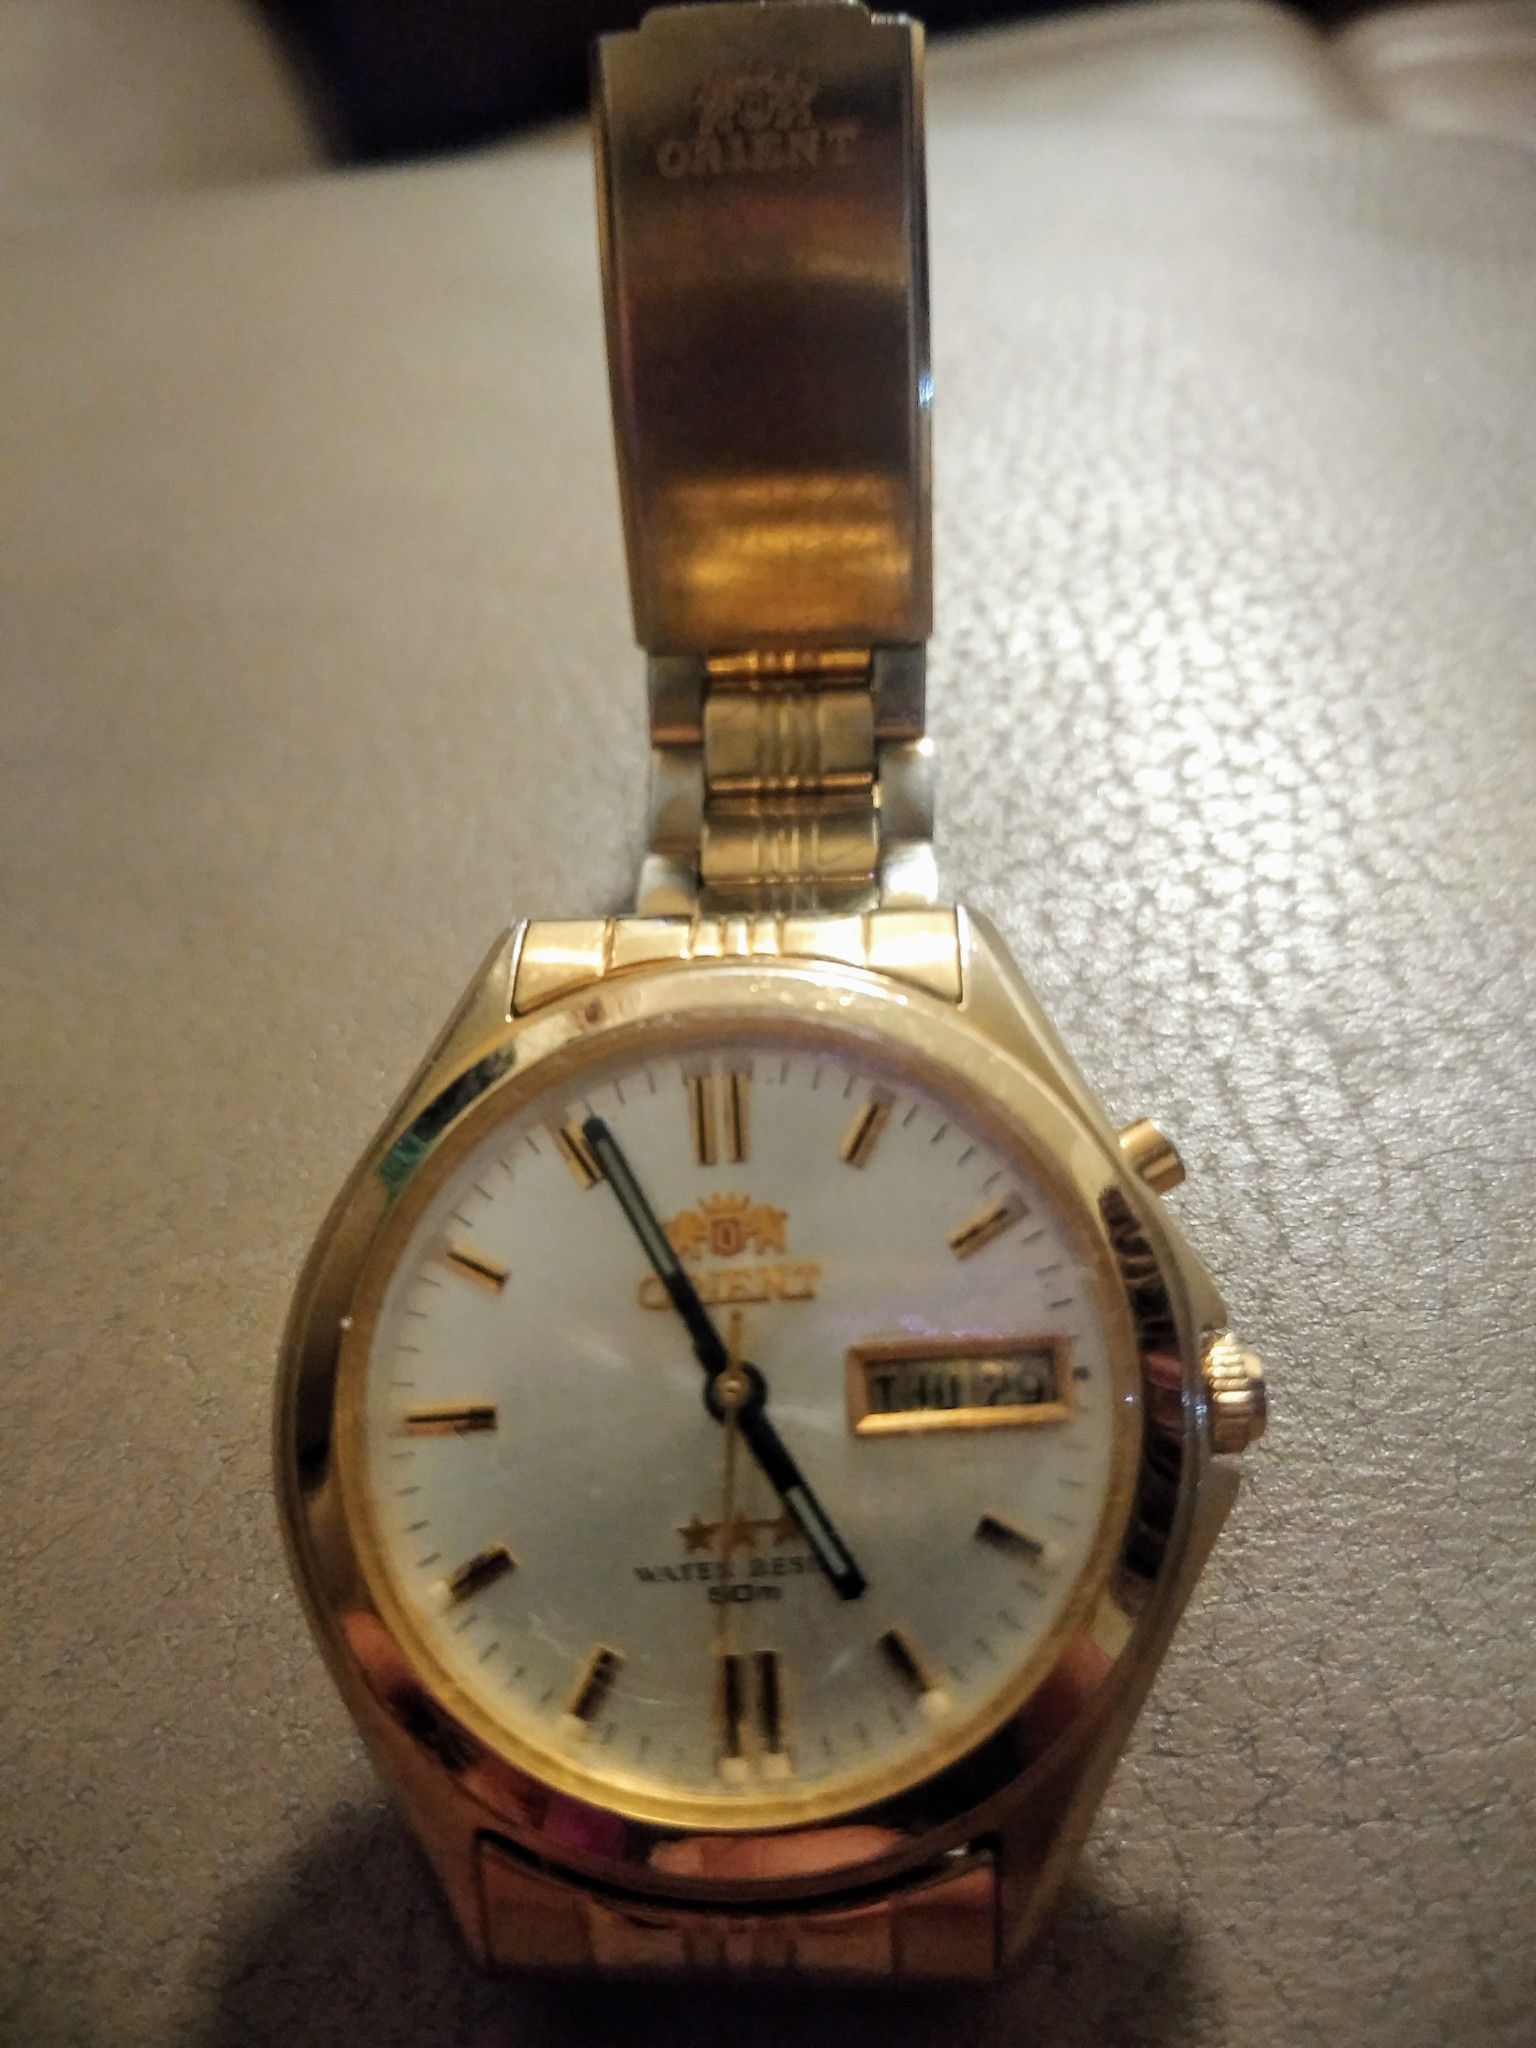 Used watch in good condition orient brand